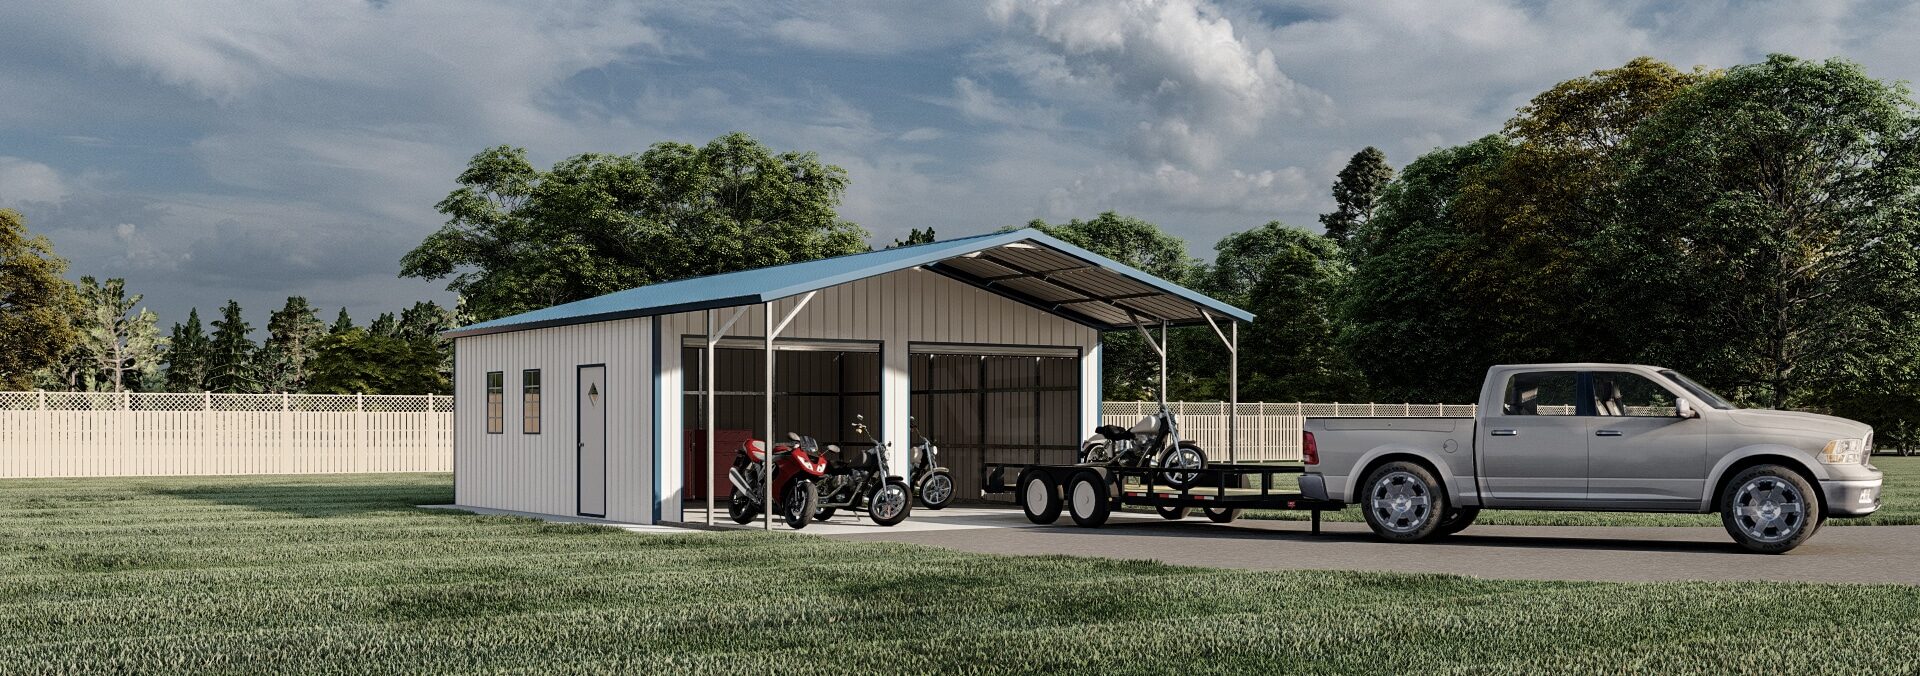 Metal building with 2 roll up doors for motorcycle storage